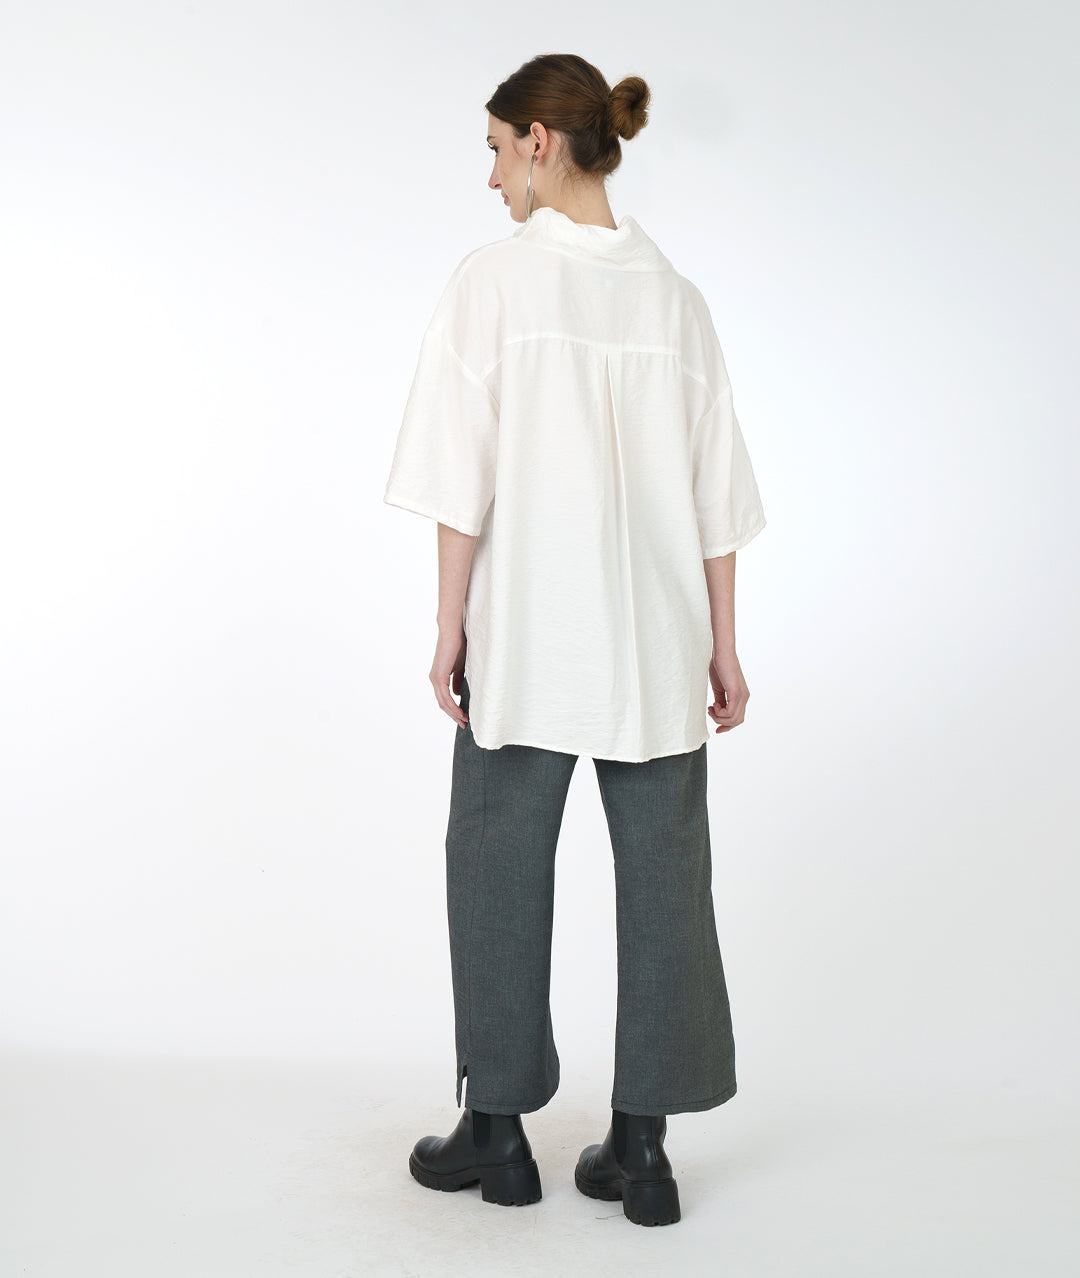 model in a wide leg grey pant with a white cowl neck top with a drop shoulder